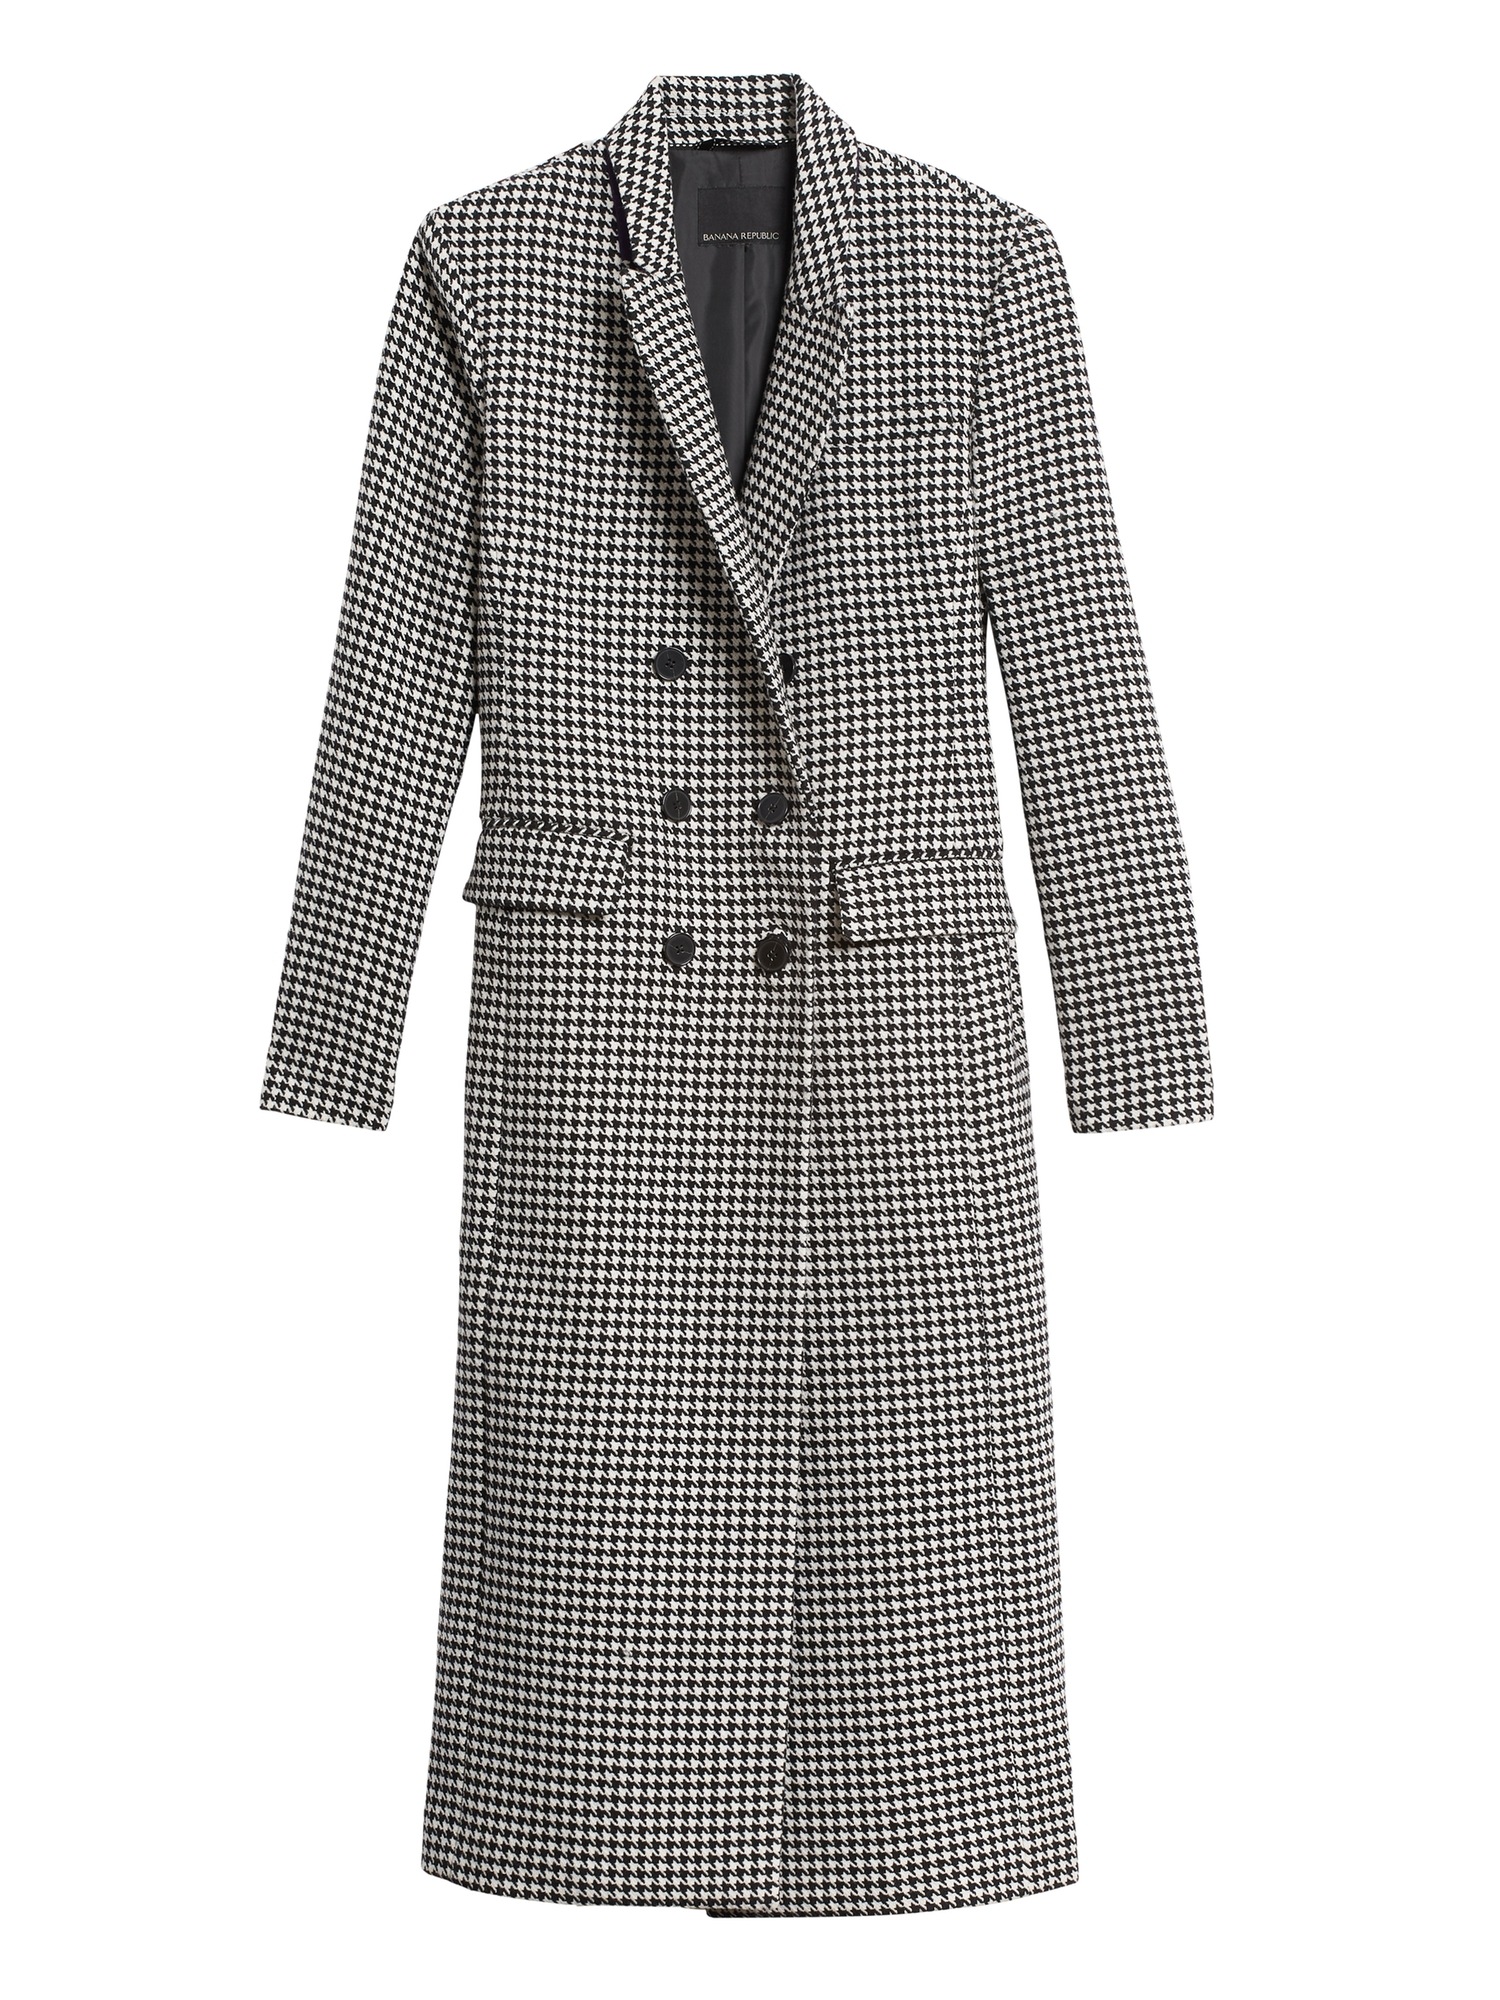 Houndstooth Print Coat Style 234121